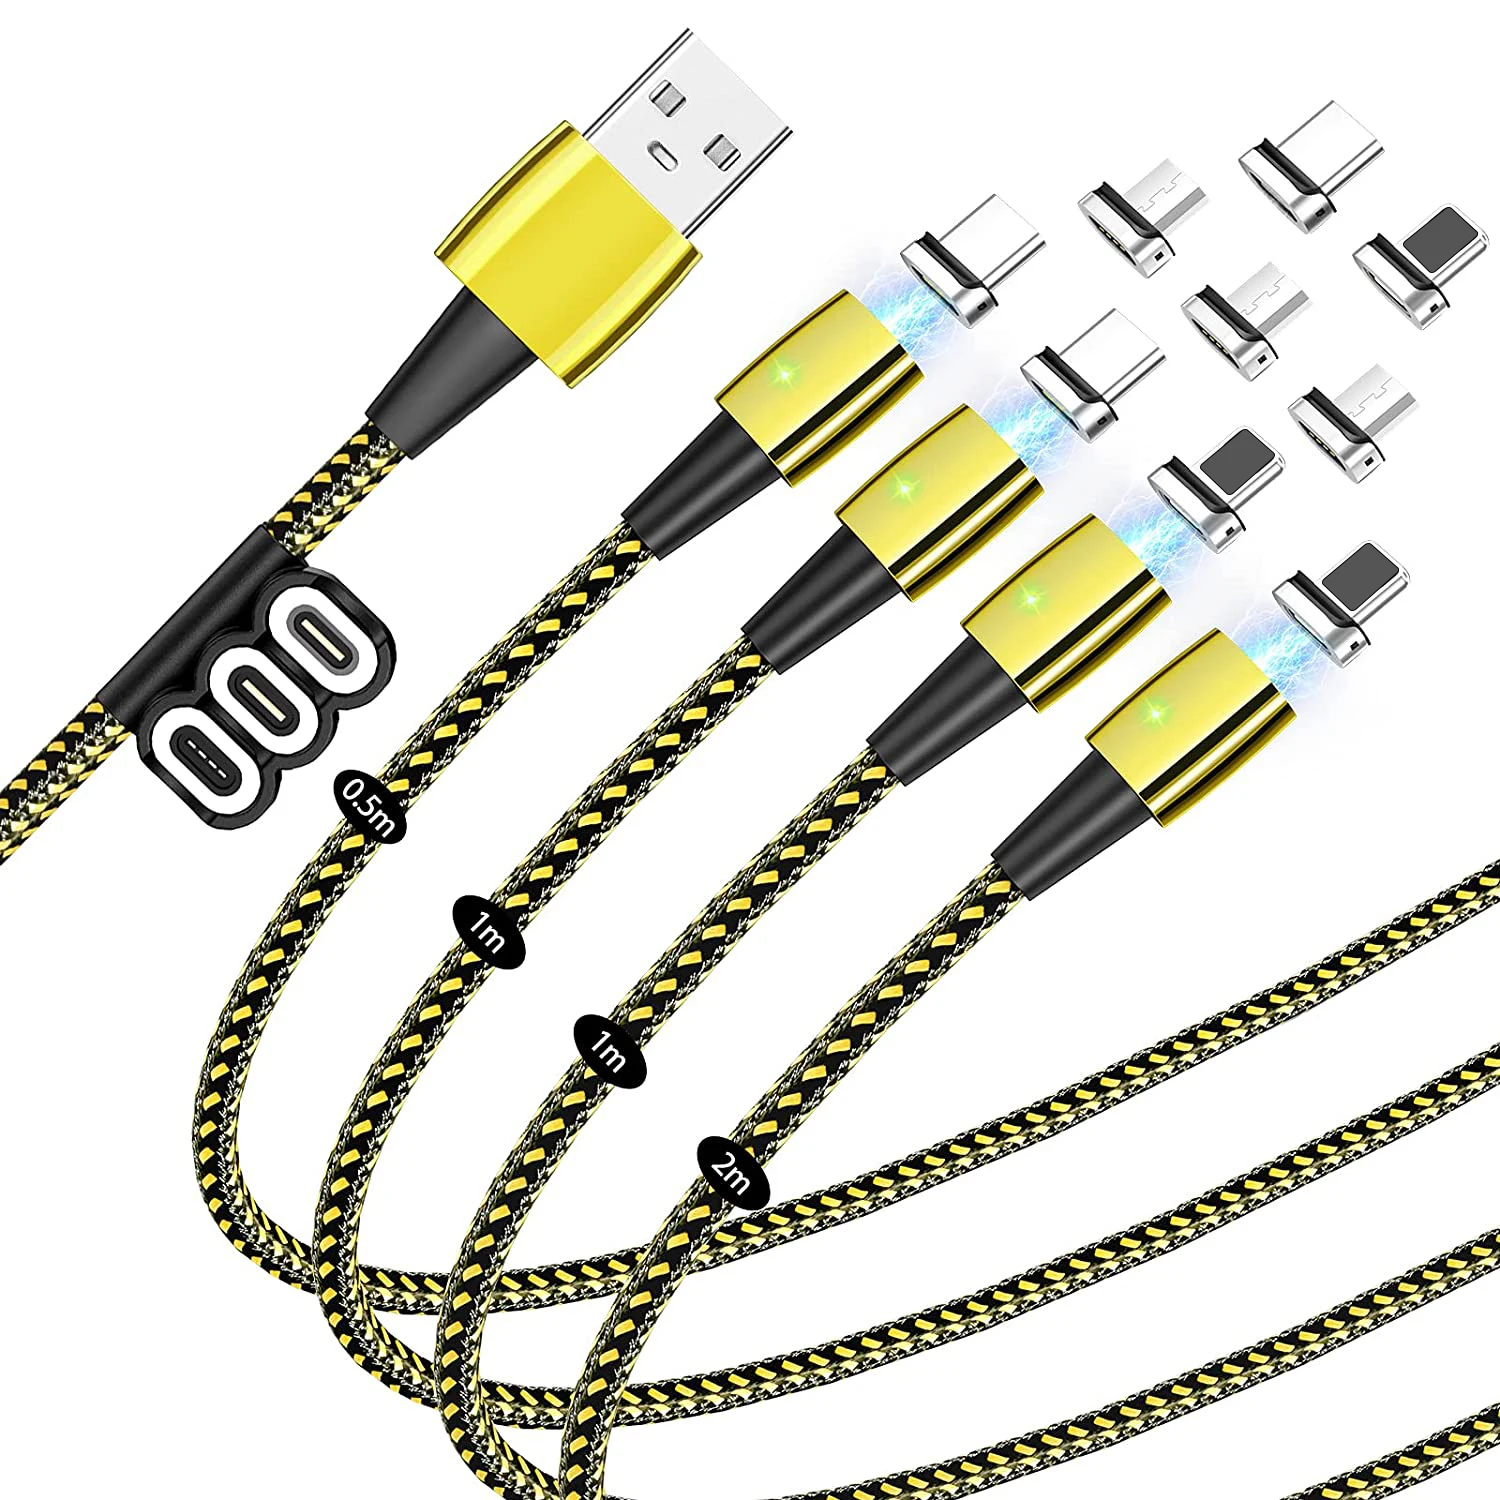 

Essager 540 Rotate Magnetic Cable 3A Fast Charging Micro USB Type C Cable For iPhone Xiaomi Magnet Charger Phone Data Wire Cord